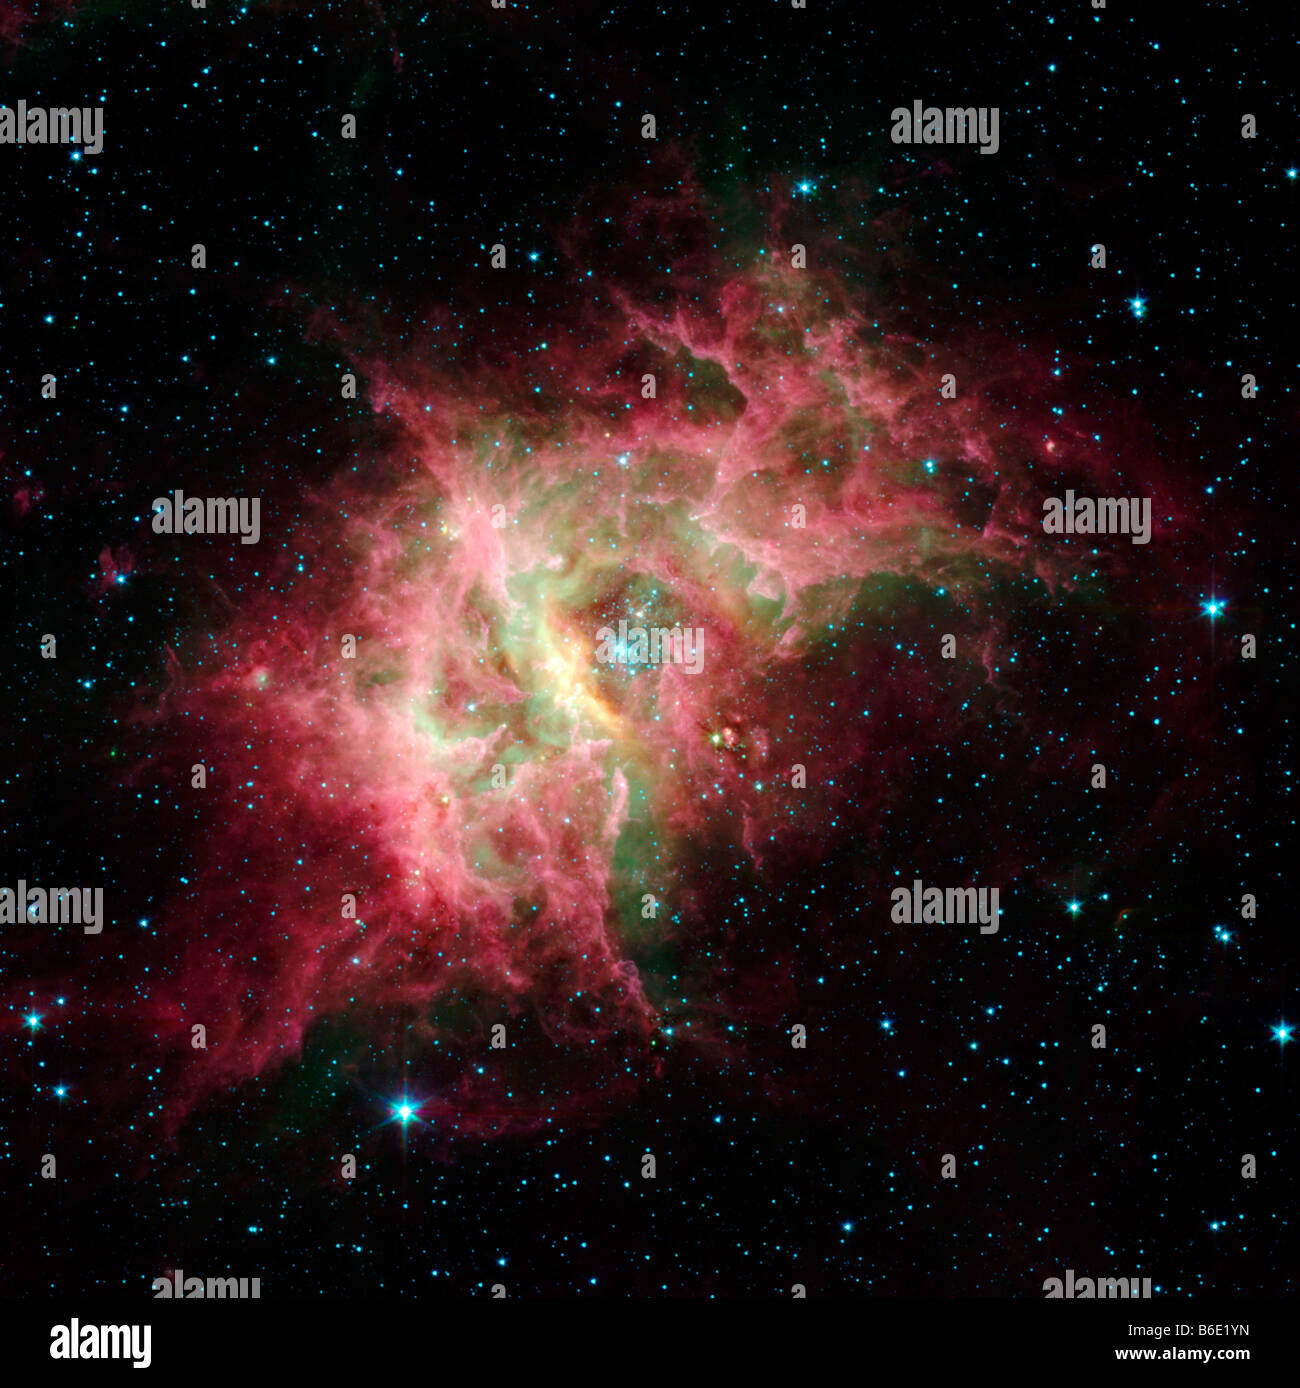 Starbirth region RCW 49, infrared Spitzer Space Telescope (SST) image Stock Photo